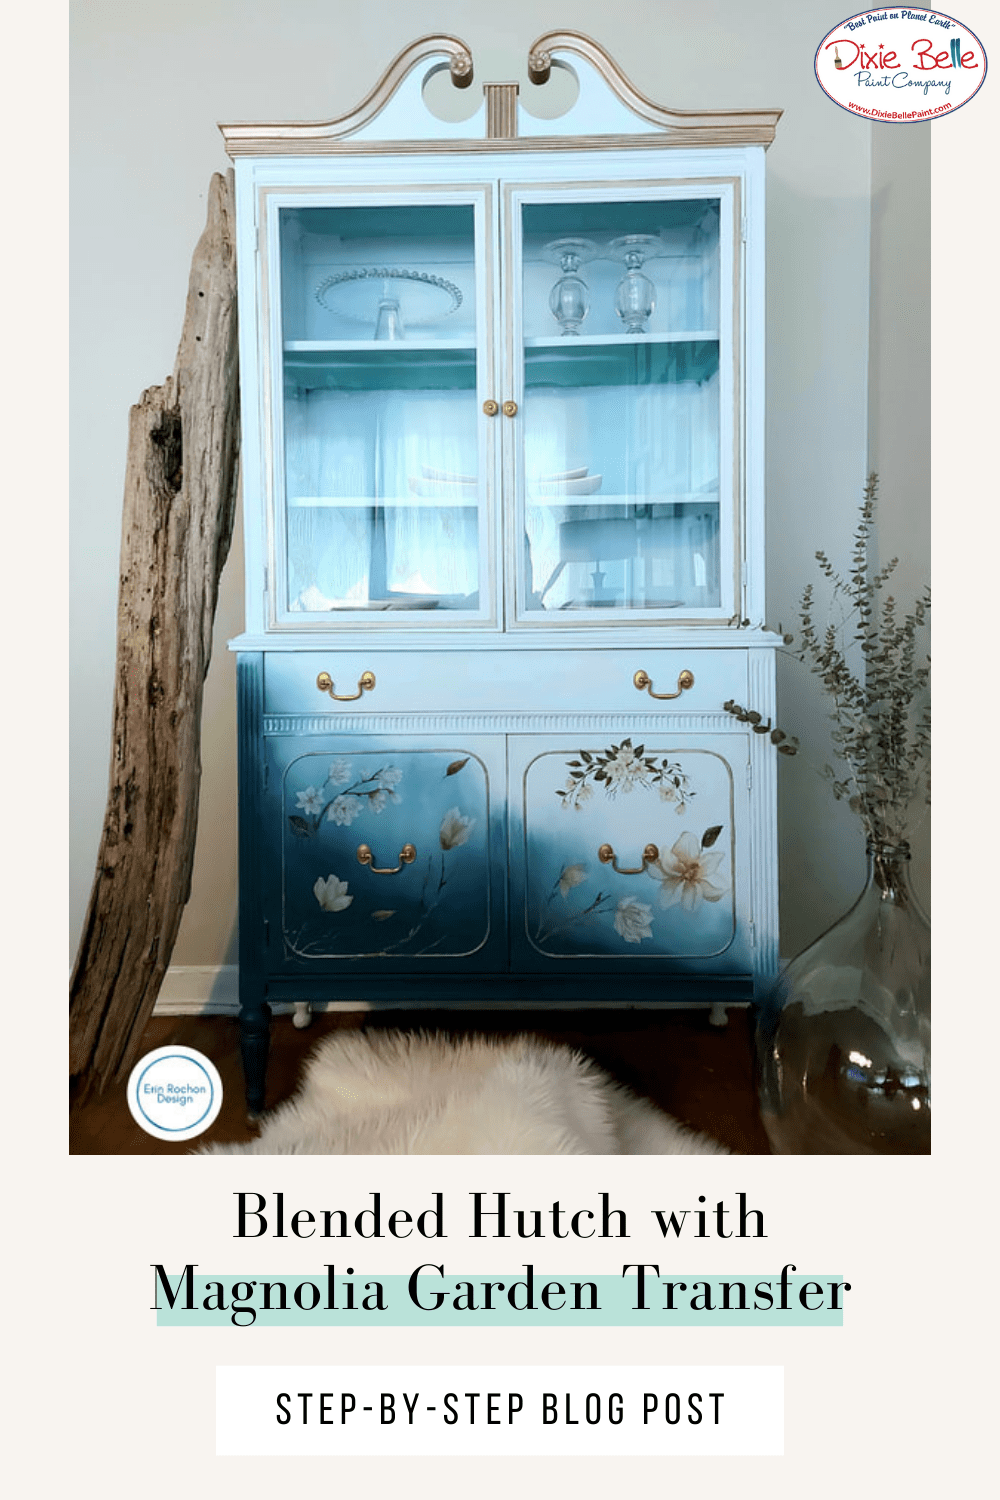 Blended Hutch with Magnolia Garden Transfer